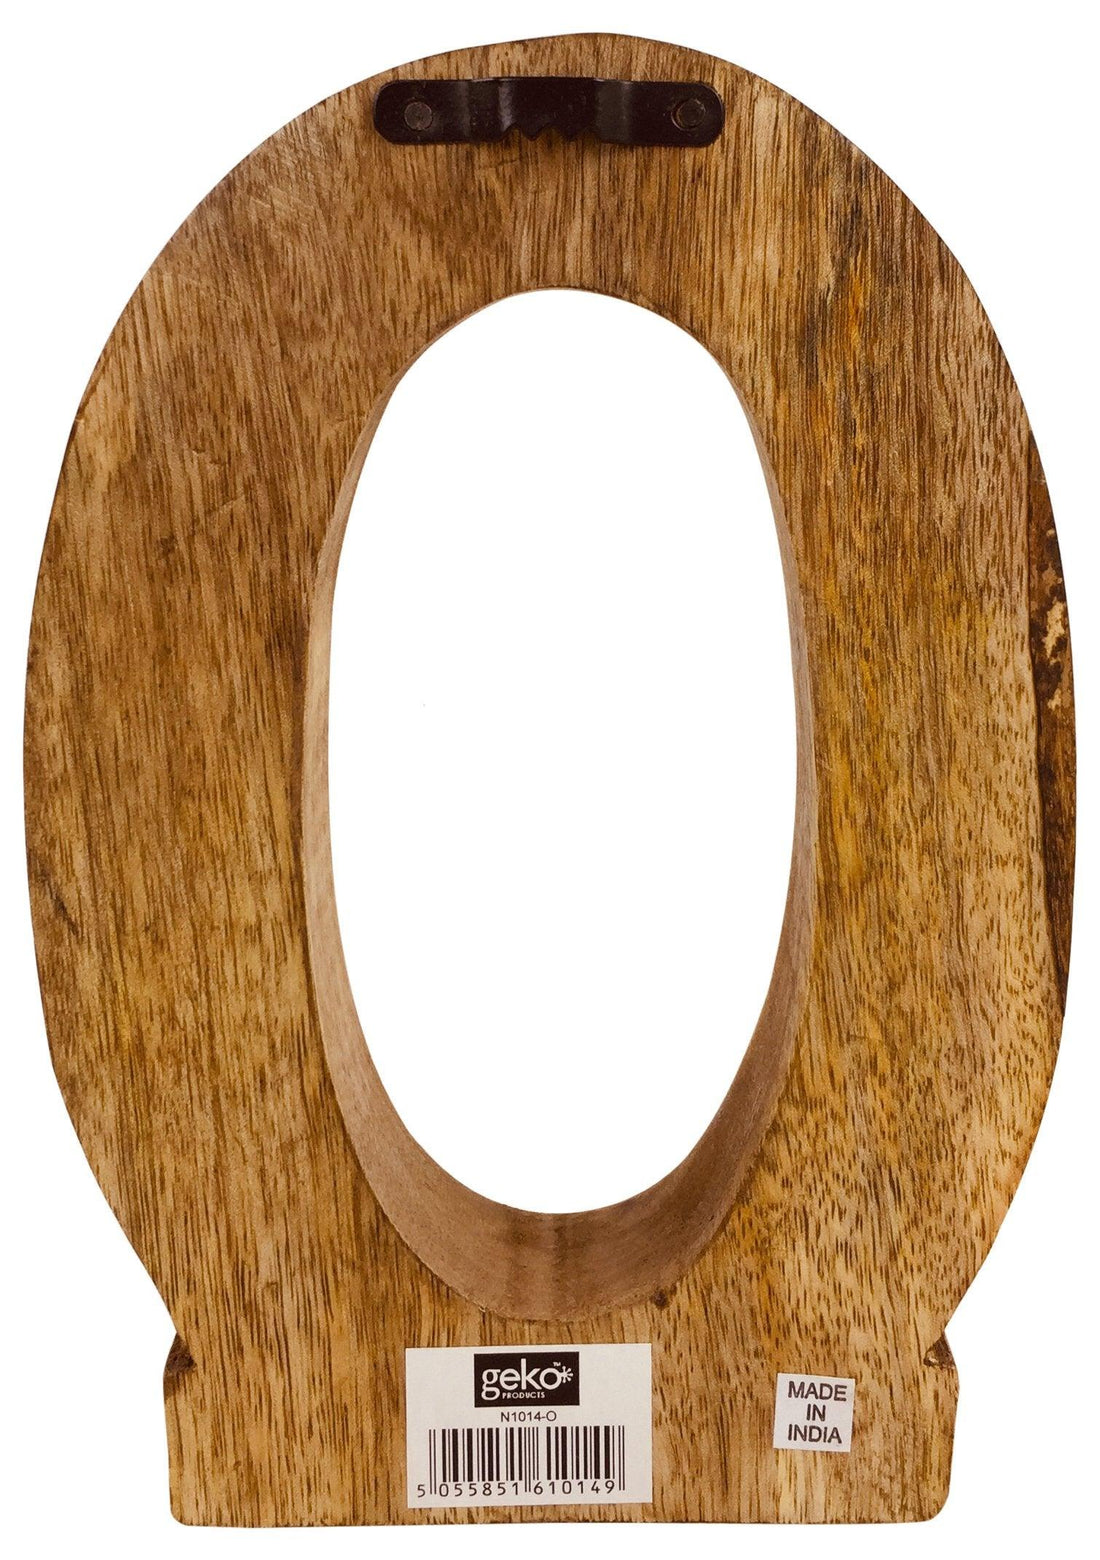 Hand Carved Wooden Geometric Letter O - £12.99 - Single Letters 